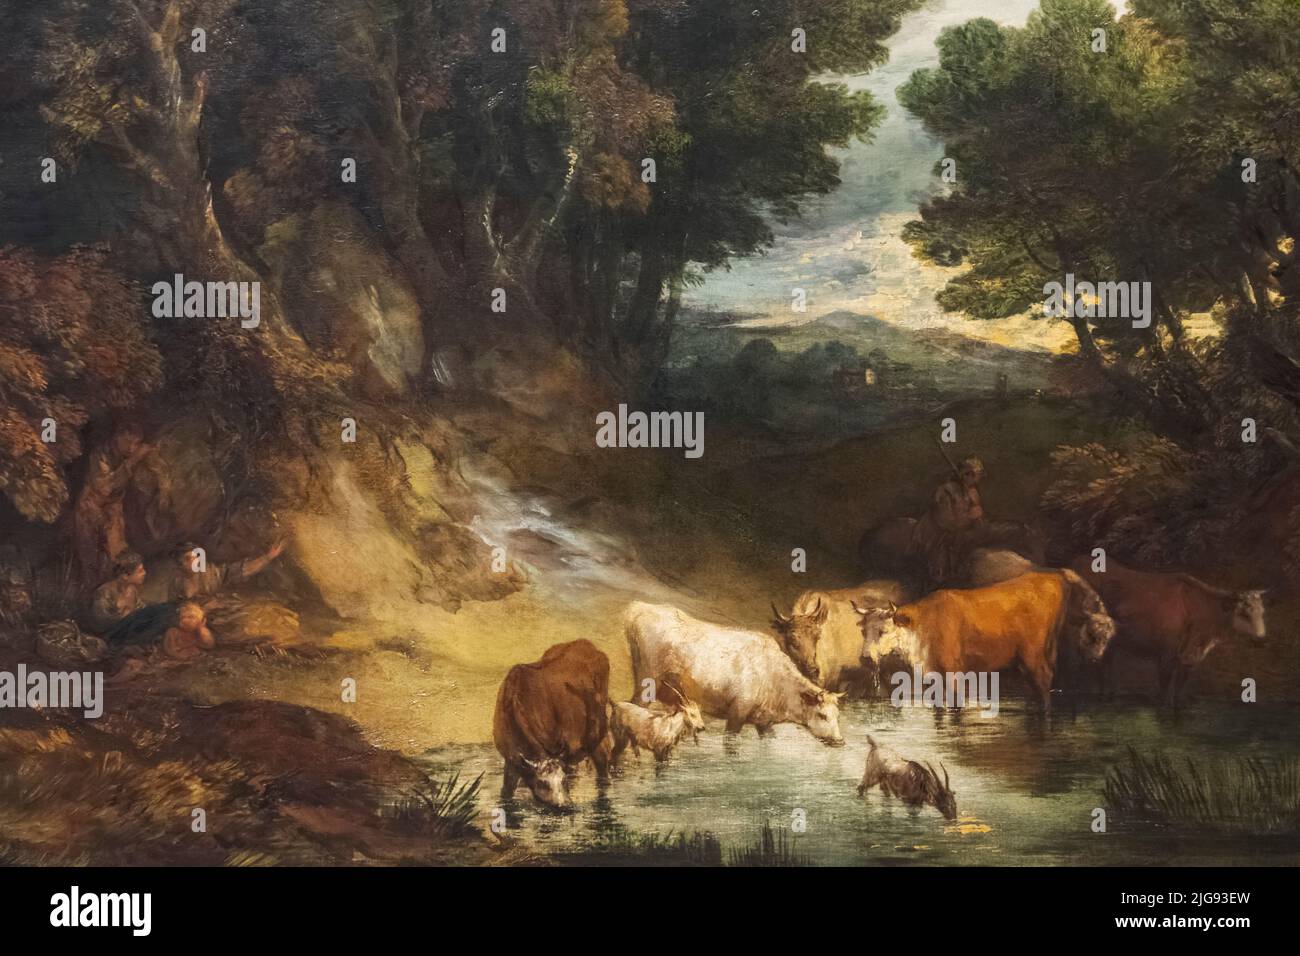 Painting titled 'The Watering Place' by Thomas Gainsborough dated 1777 Stock Photo